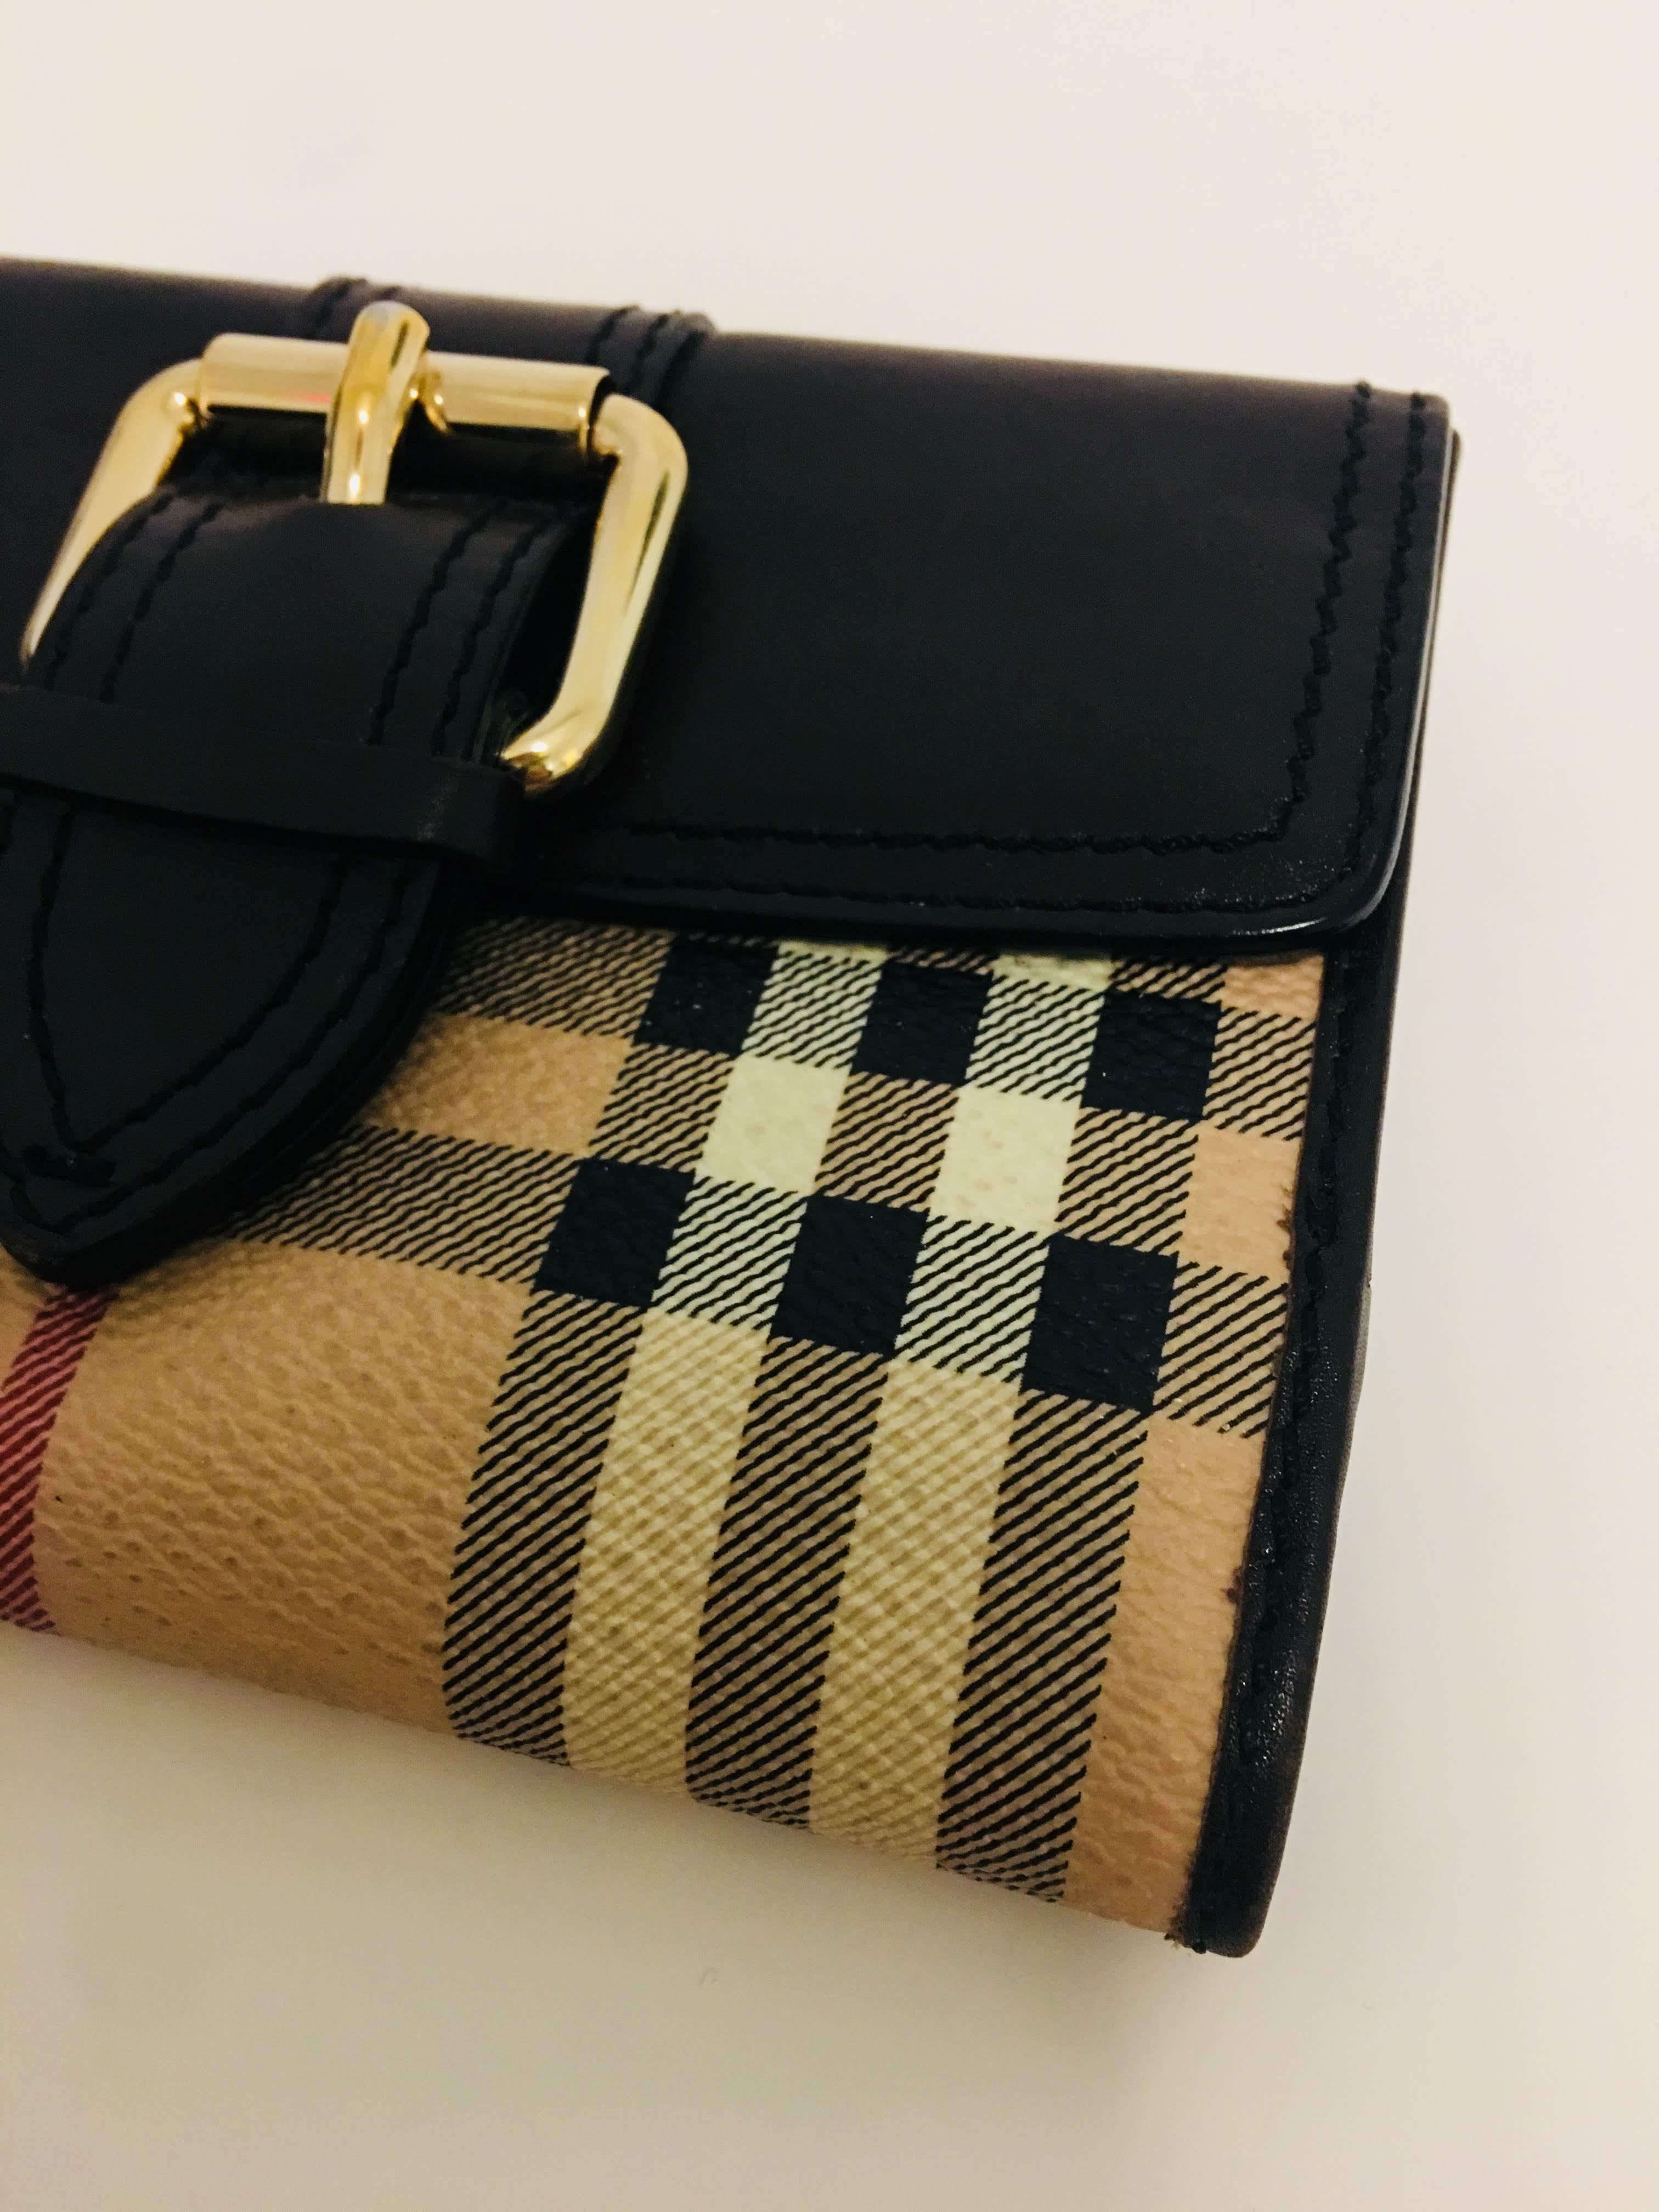 Burberry Beige Leather Wallet with Signature Plaid, Trim-Fold Style with Gold Buckle and Dark Brown Leather Details. Credit Card and Cash Slots.